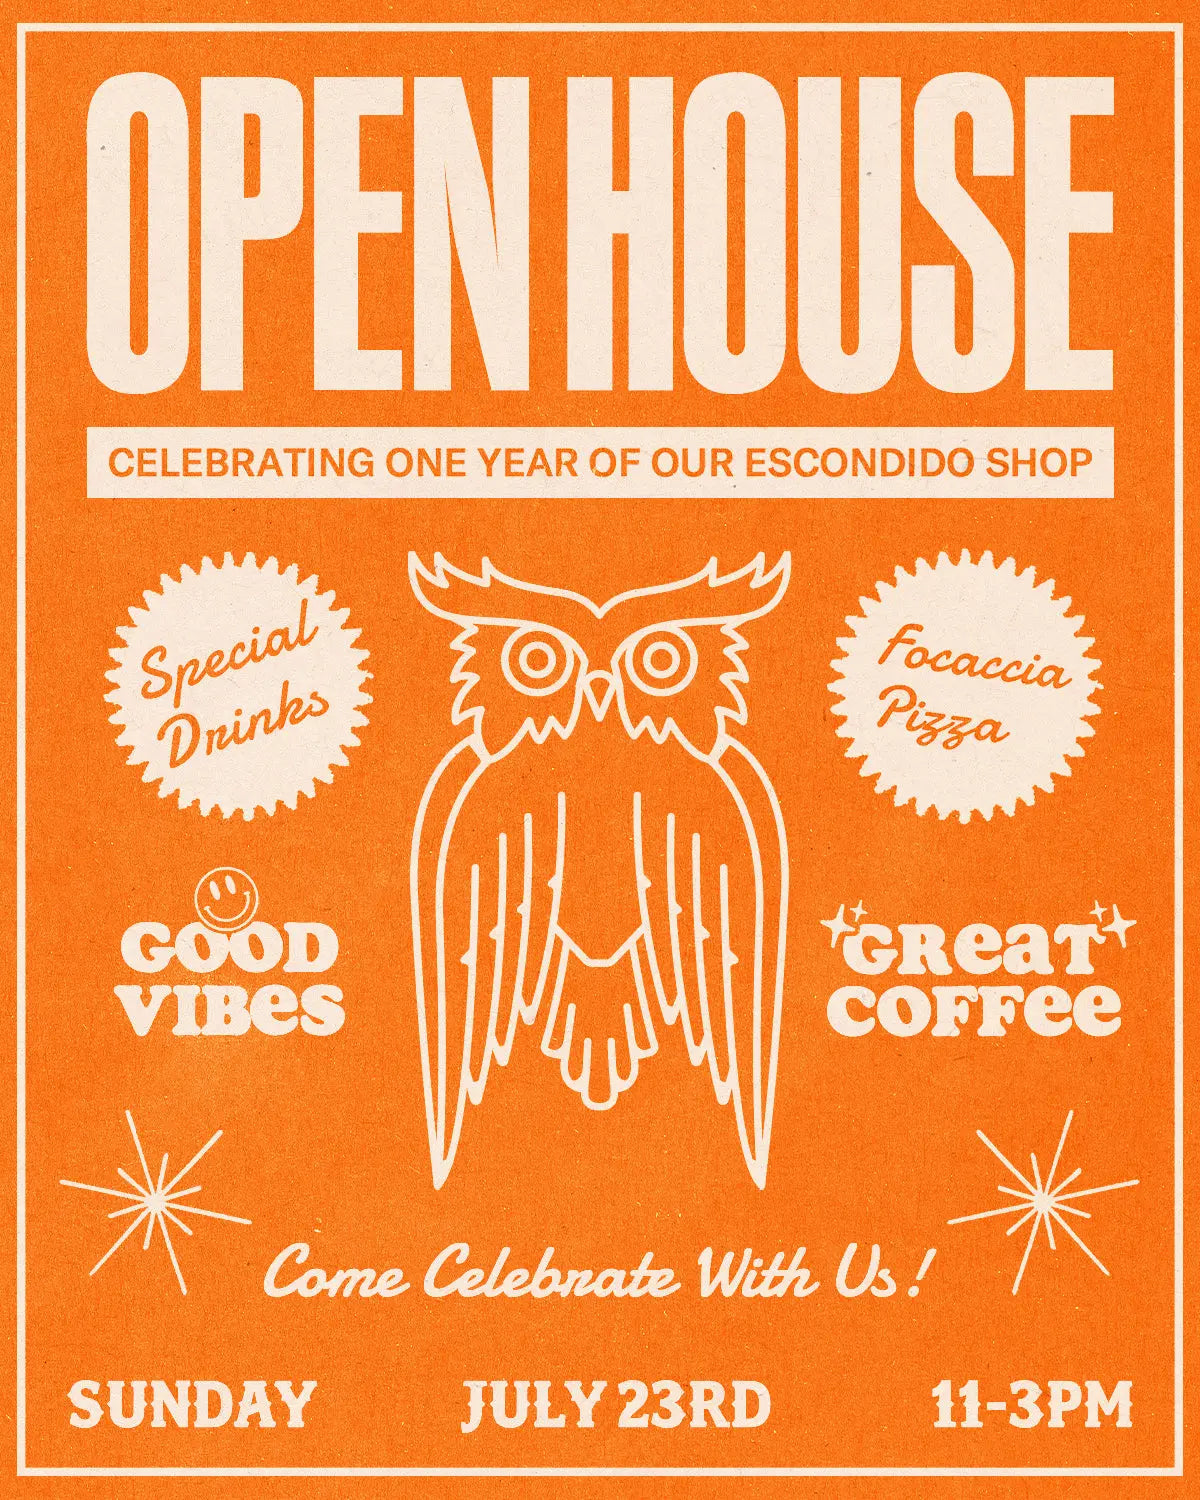 Join Us for a Delightful Open House Celebrating Our One-Year Anniversary in Escondido!